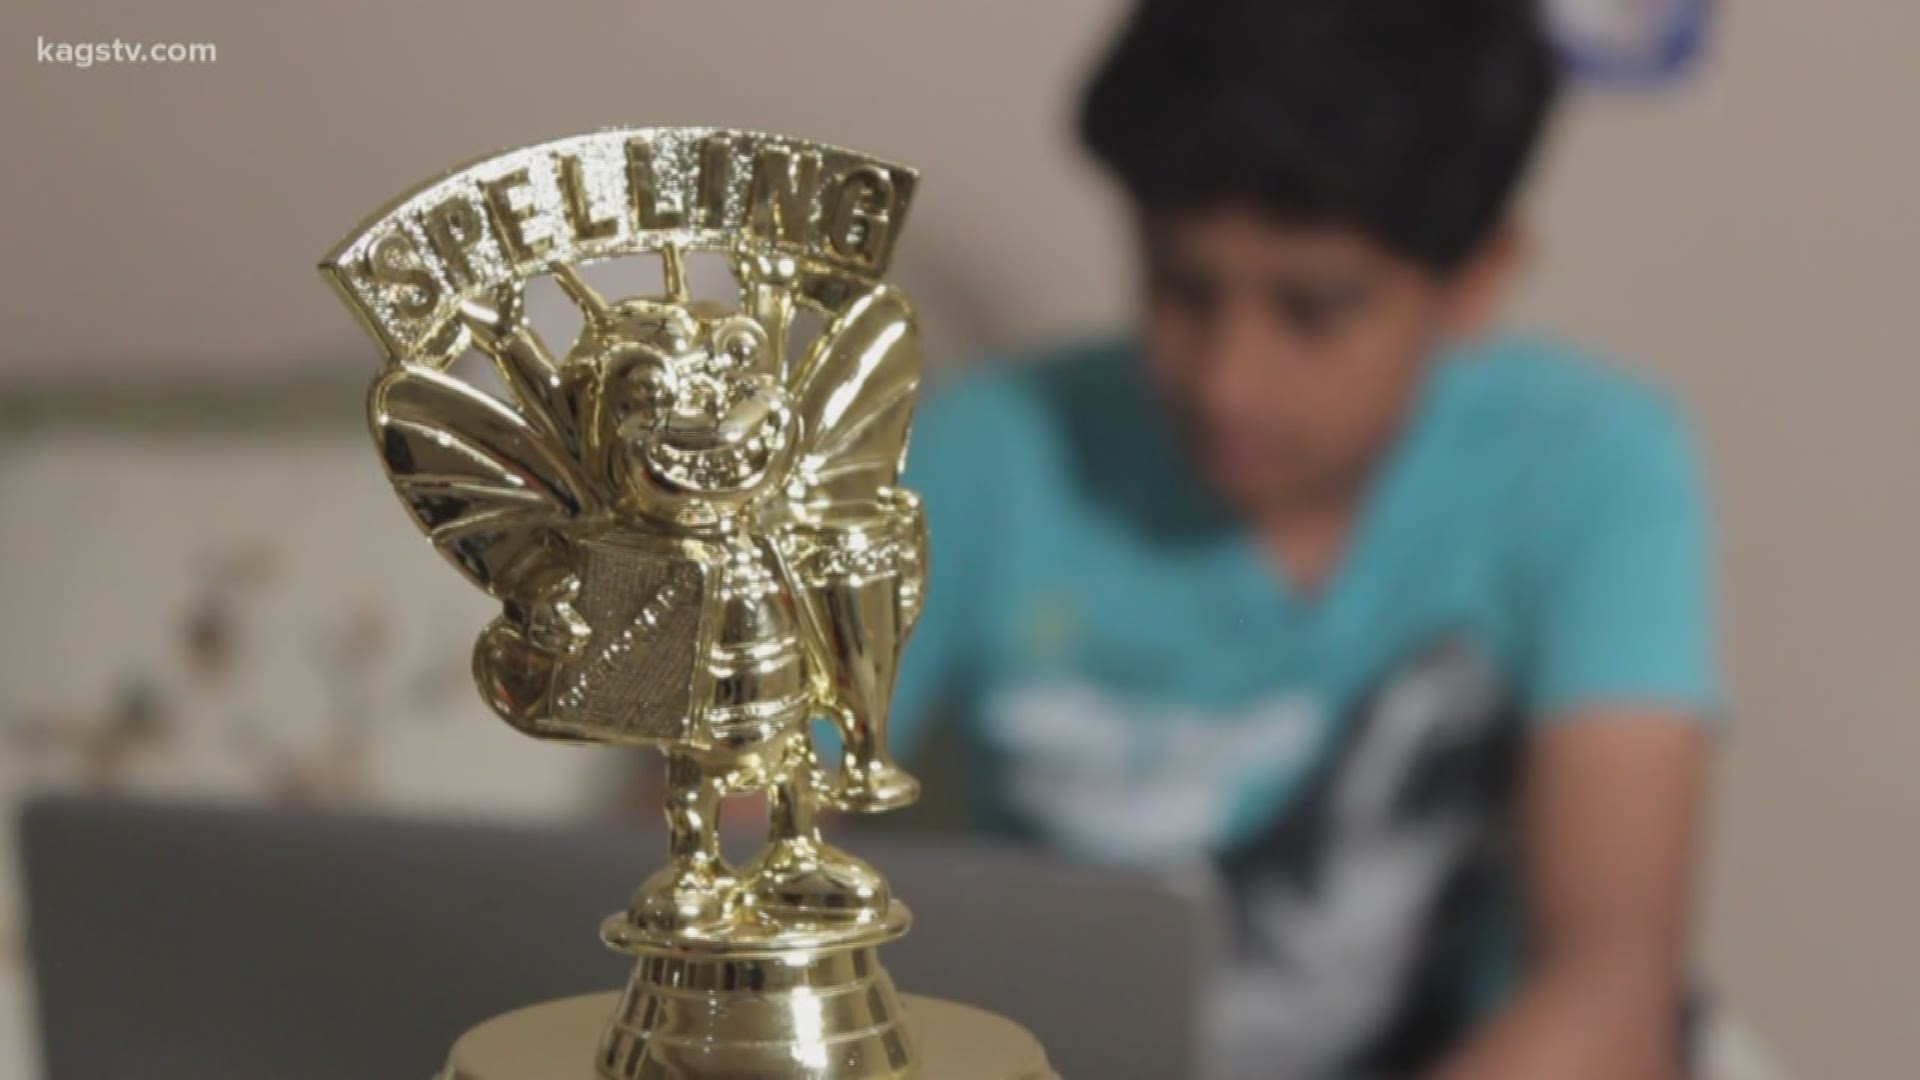 Sankalp is 12 -years-old and will compete in the national bee in late May.